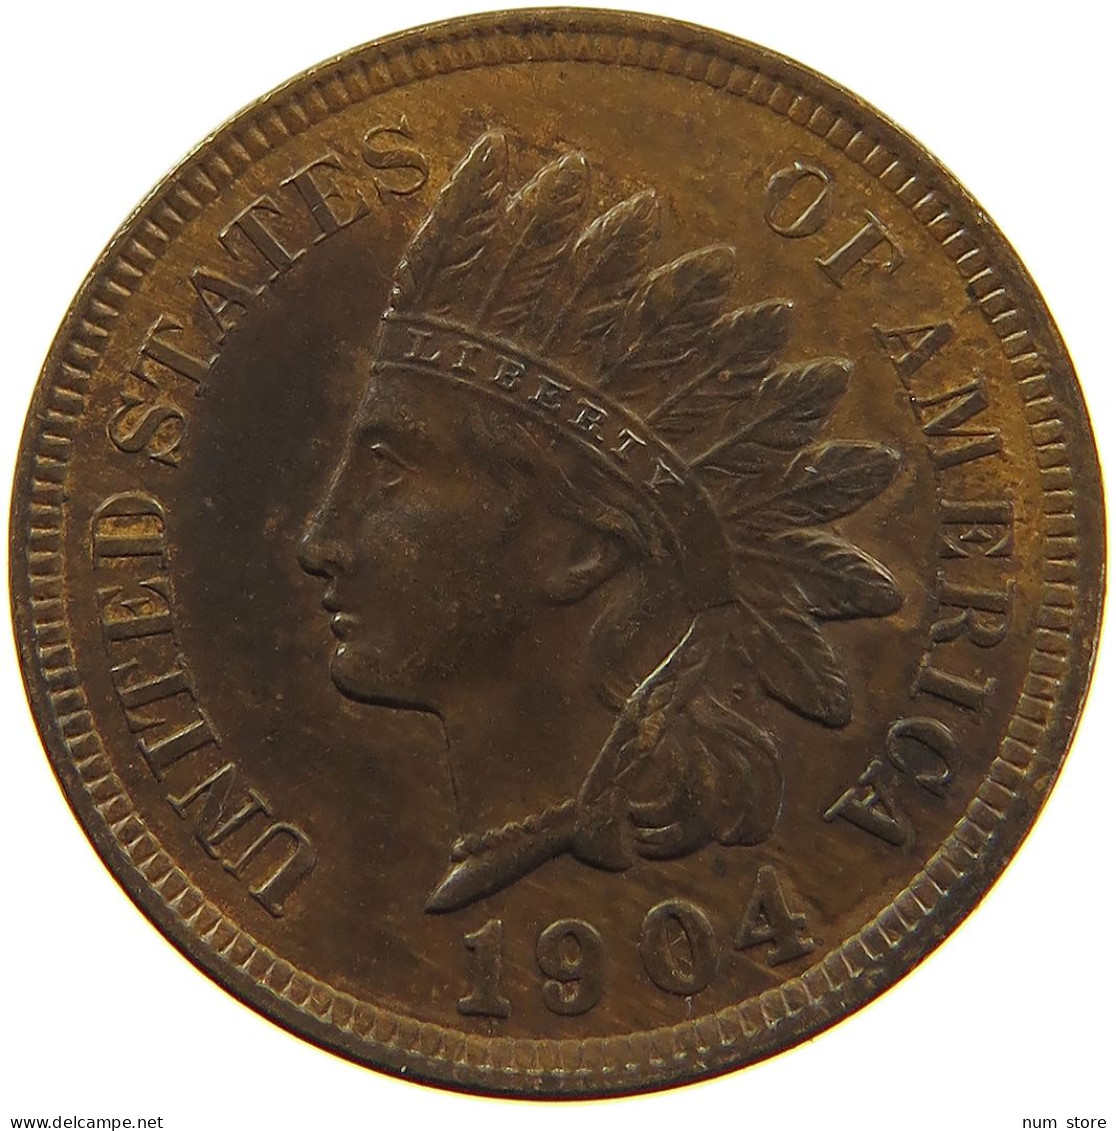 UNITED STATES OF AMERICA CENT 1904 INDIAN HEAD #MA 103875 - 1859-1909: Indian Head